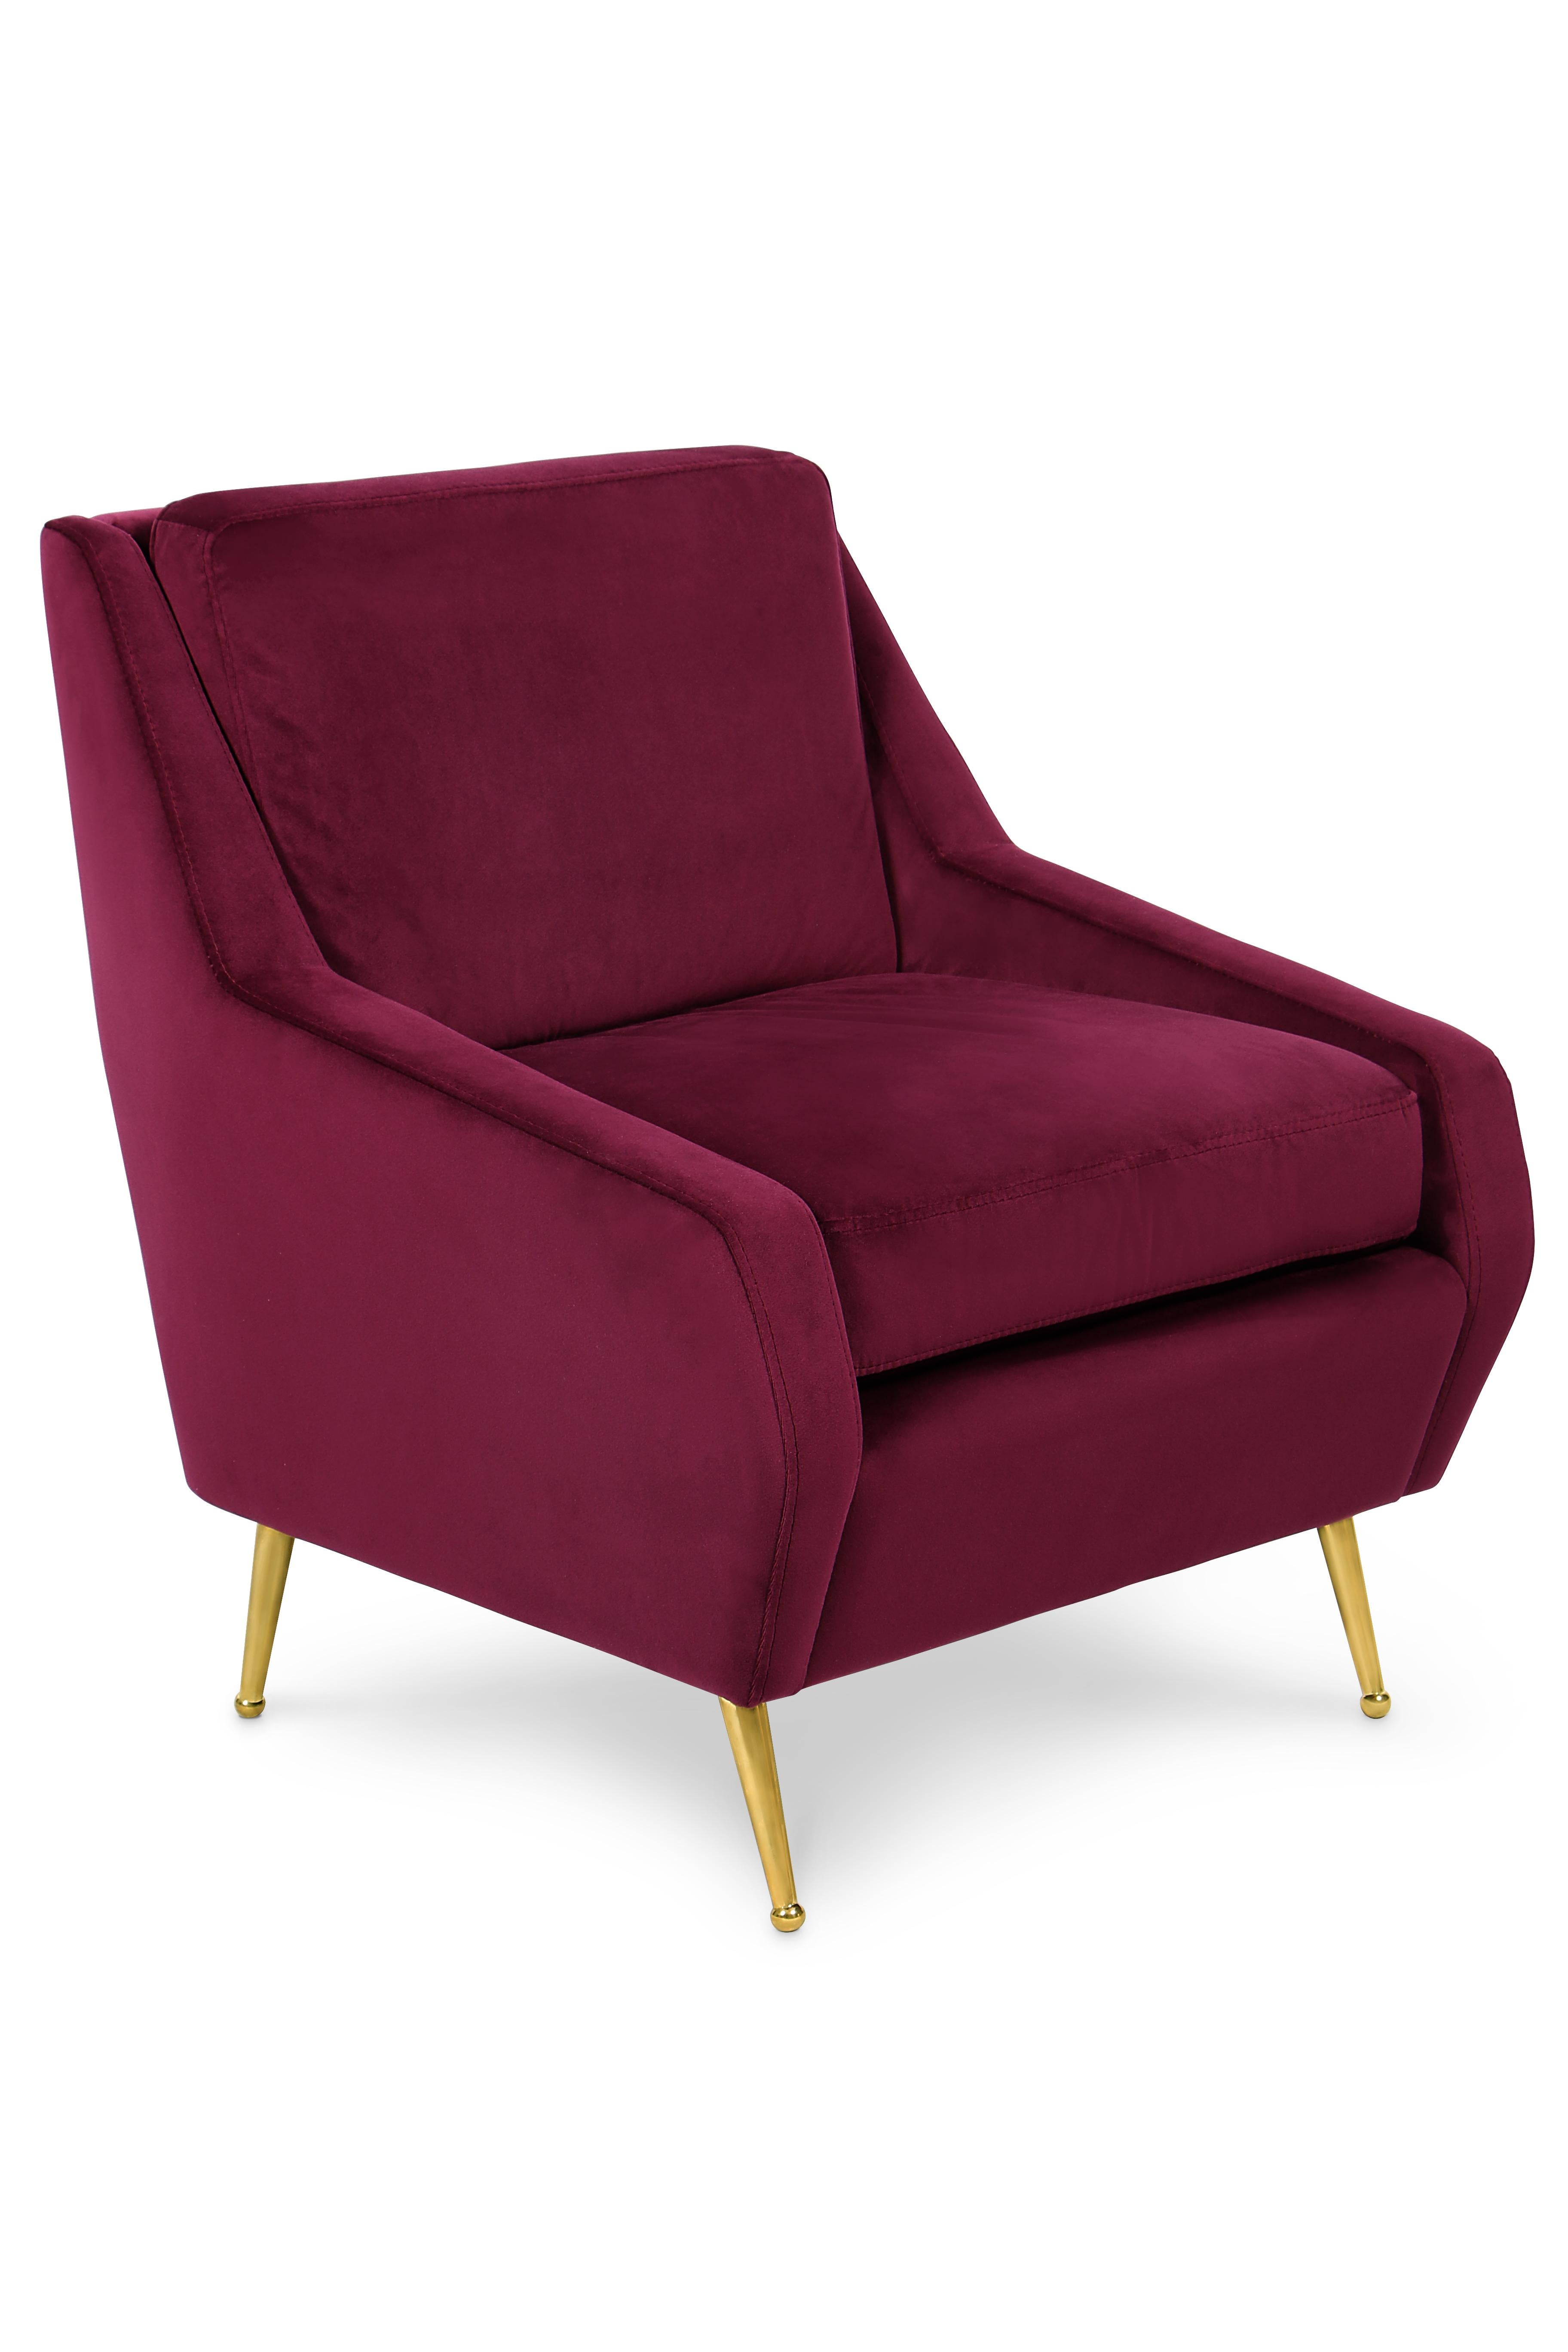 Romero is a lounge chair where the geometric sleek lines merge with comfort. It is inspired in the most bold side of modernism, featuring oblique armsrests with a fully upholstered body in velvet. It has a slim leg style made of polished brass and a